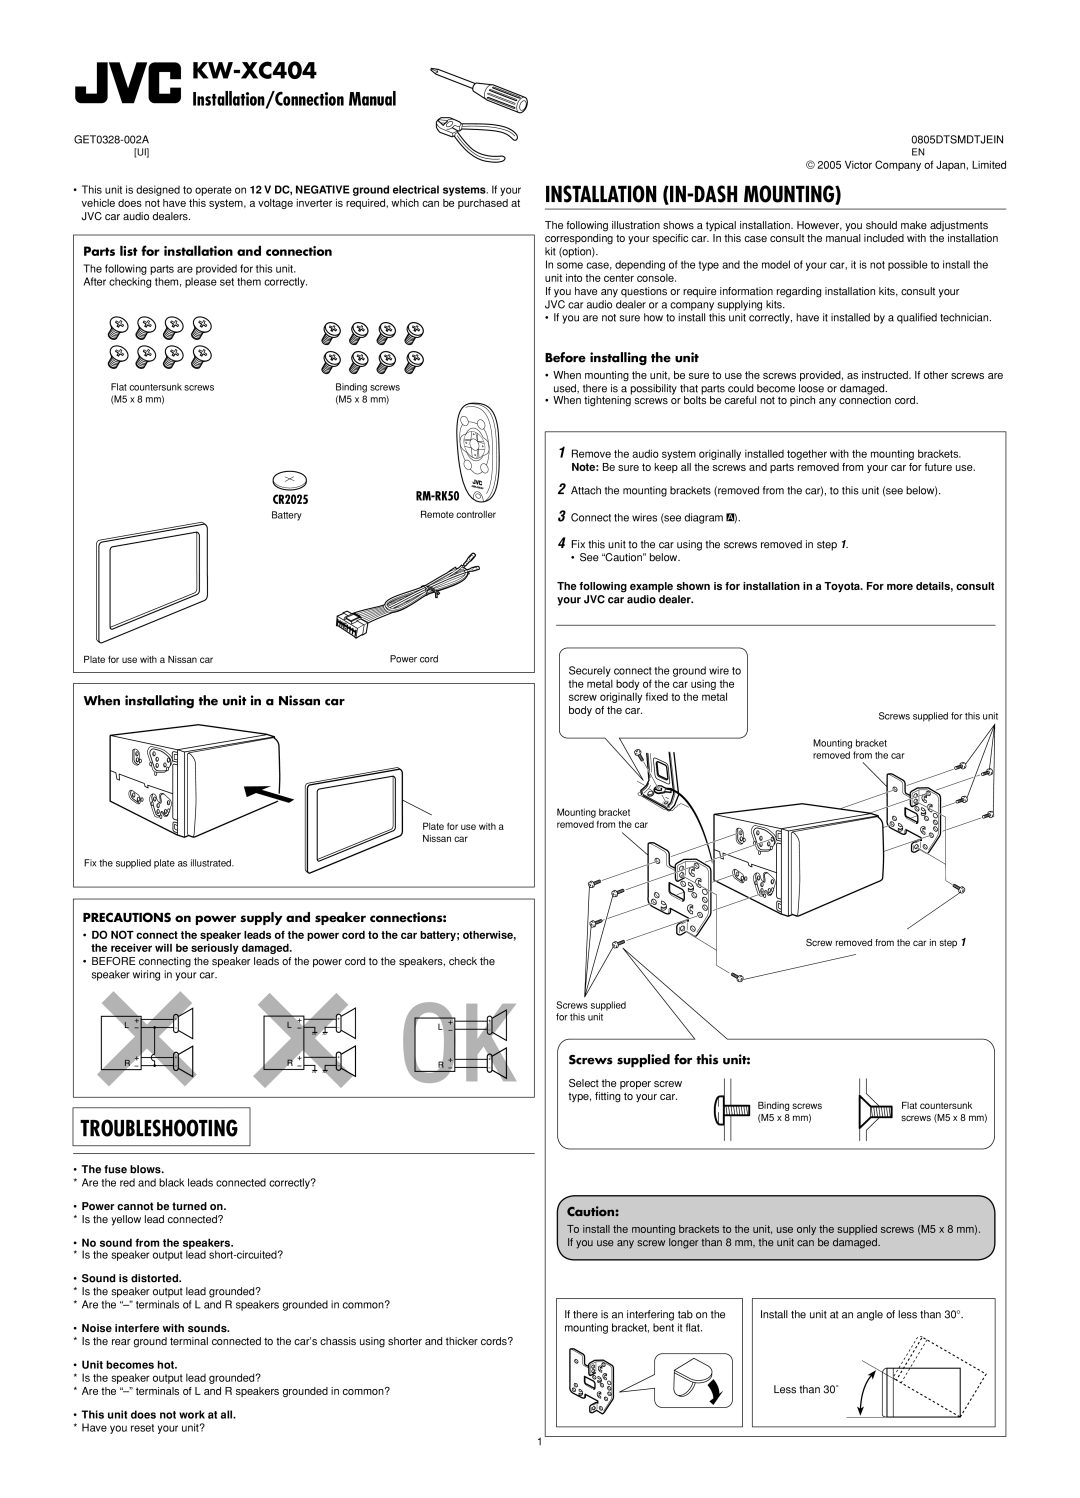 JVC W-XC406 manual KW-XC404, Installation In-Dashmounting, Troubleshooting, Installation/Connection Manual, The fuse blows 